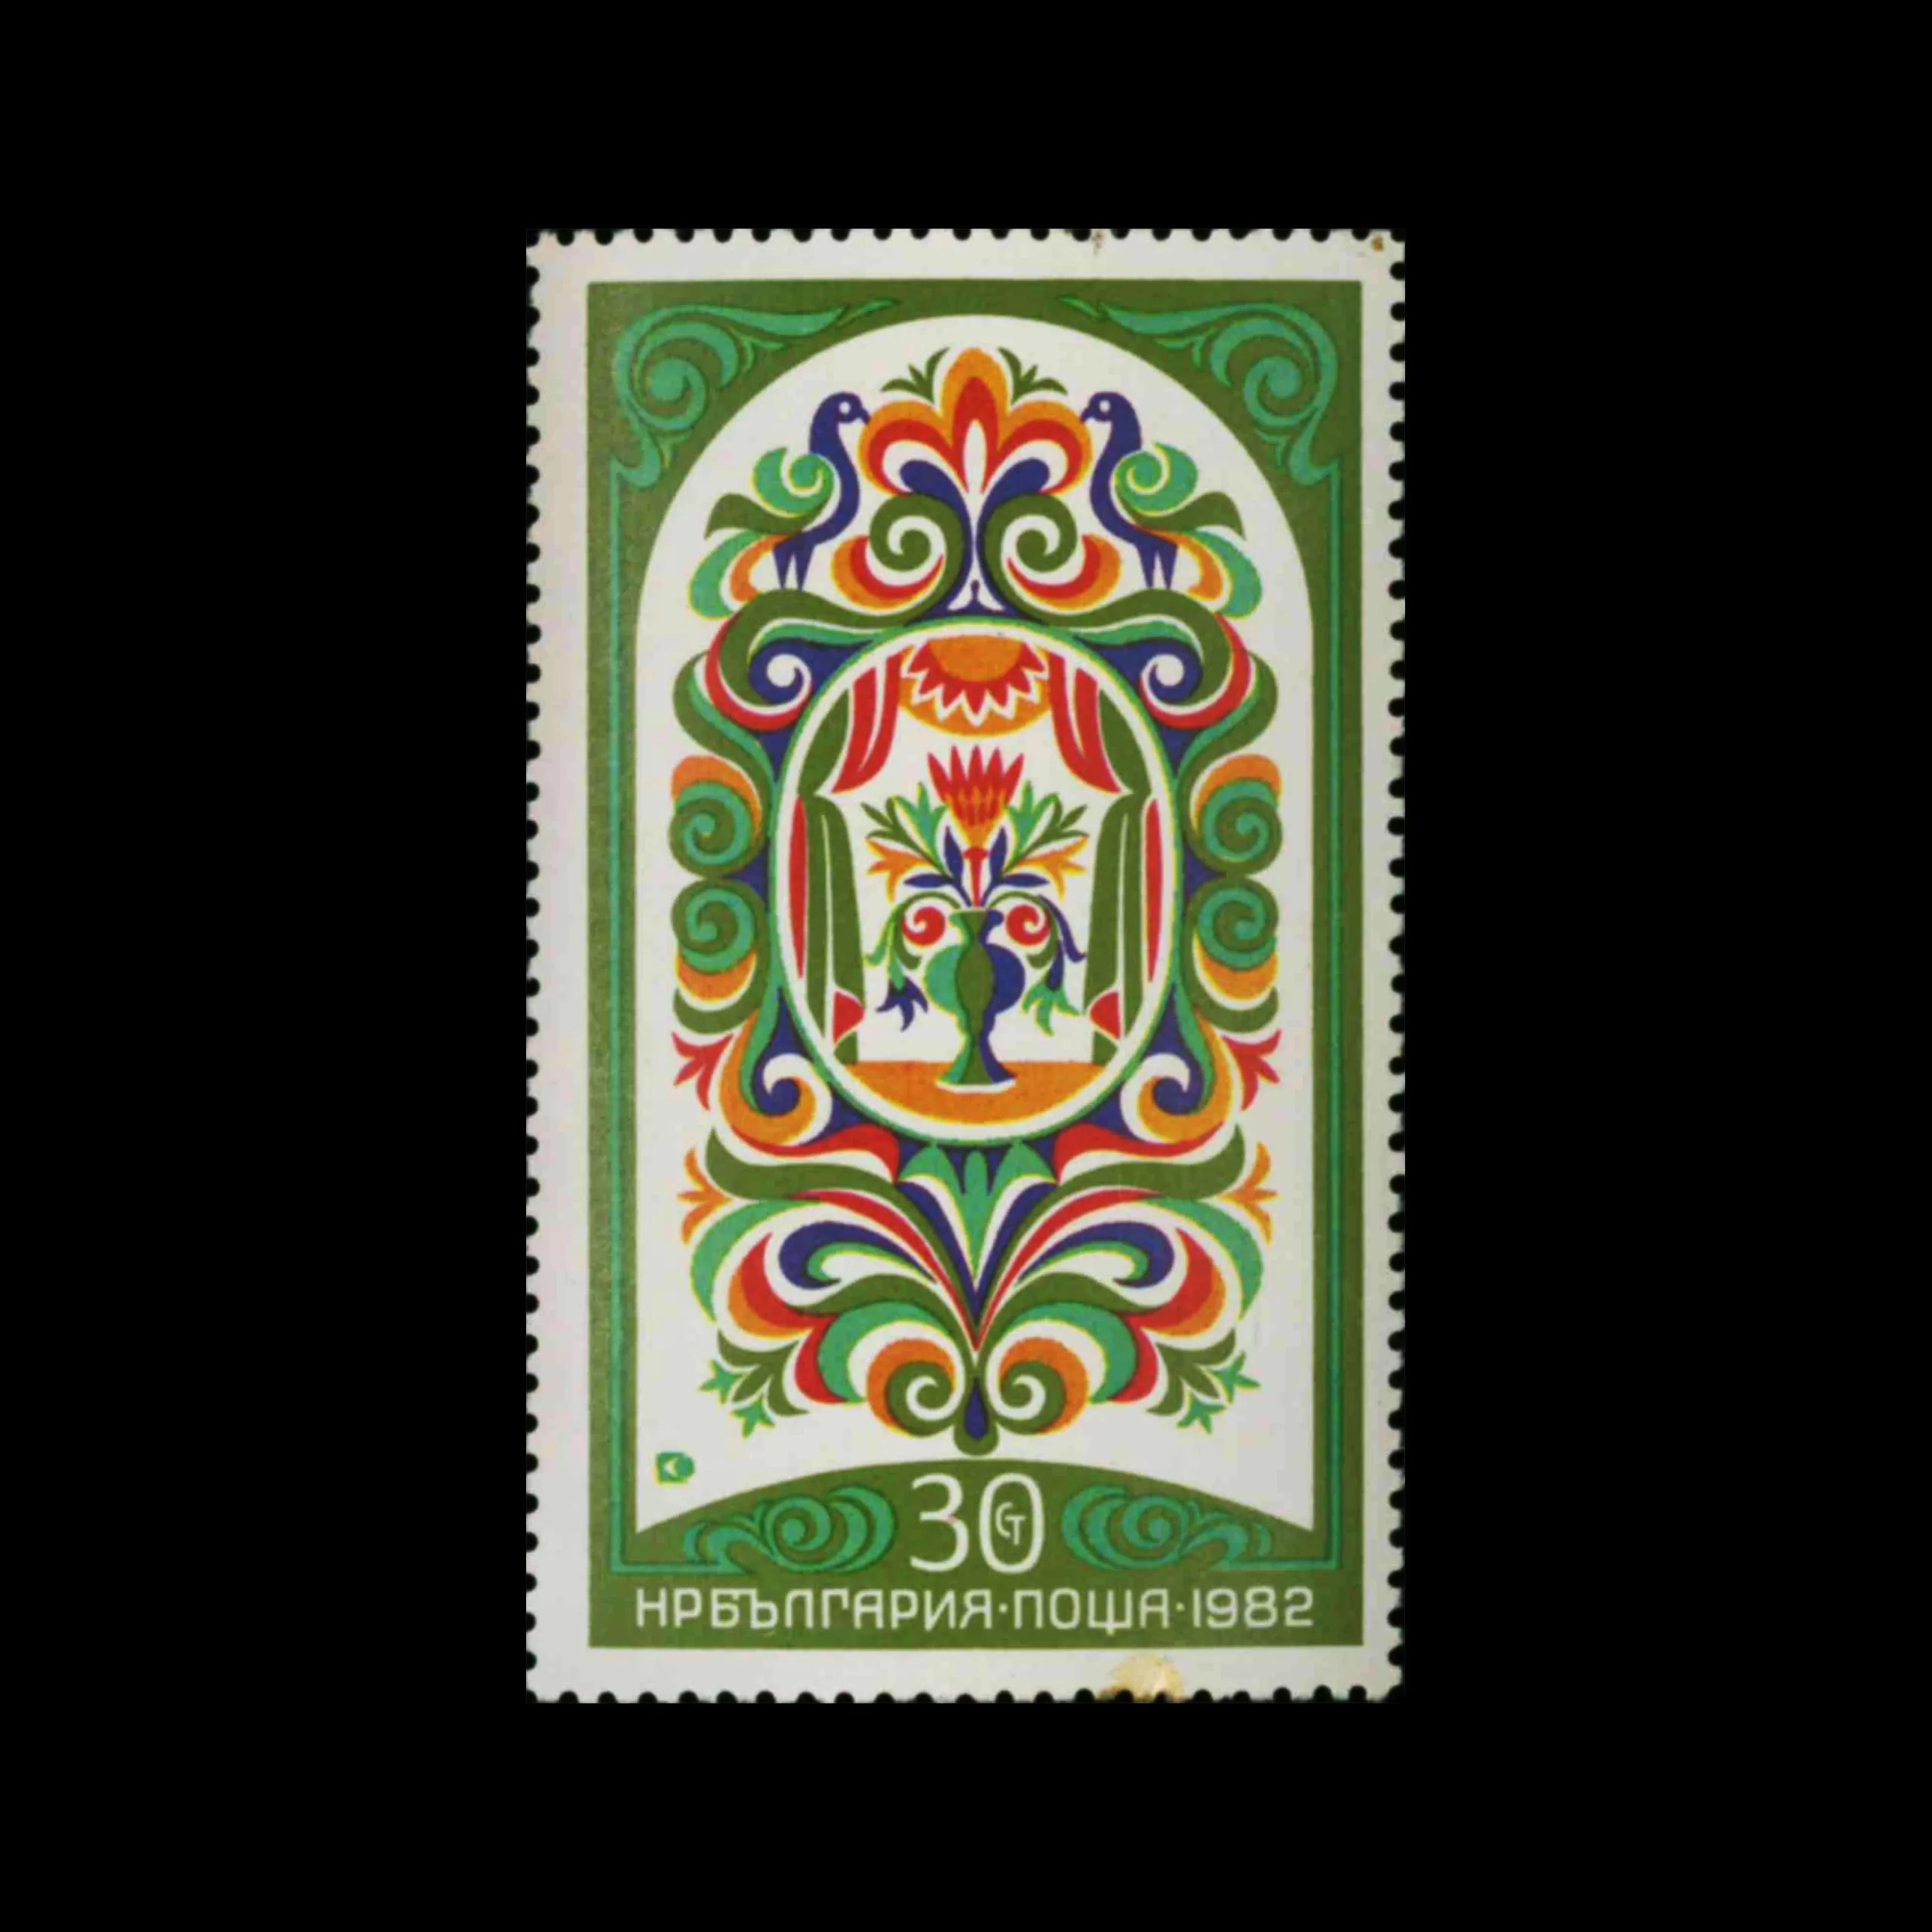 Folklore, Bulgarian Stamps, 1982. Designed by Stephan Kantscheff